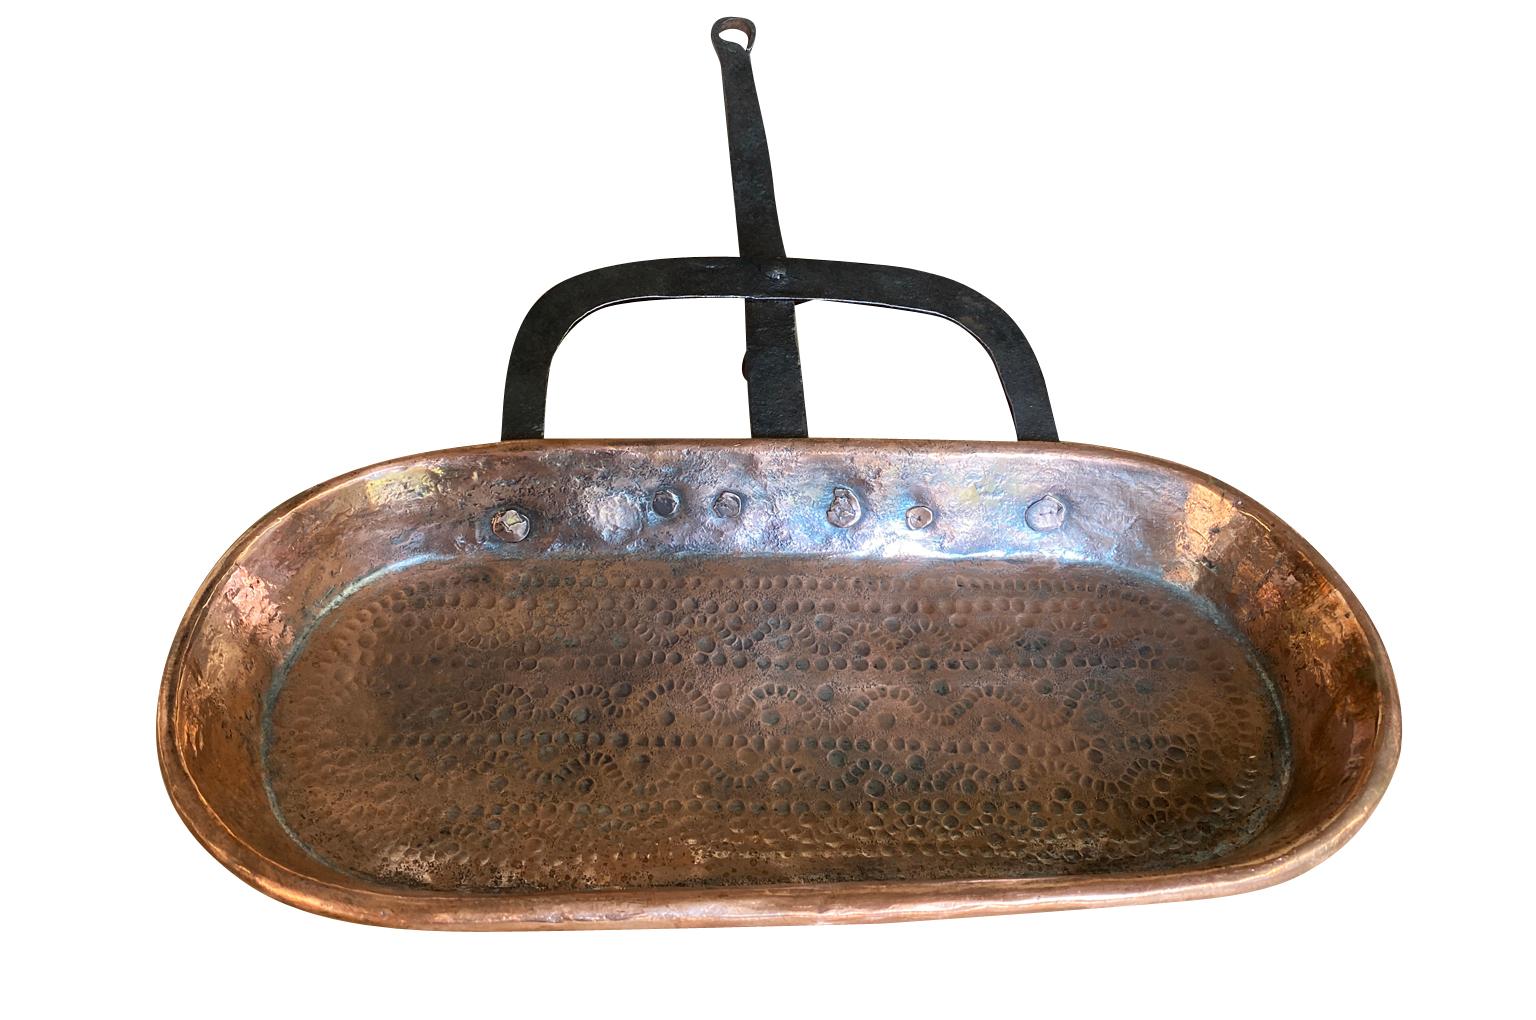 A wonderful 18th century copper Frituese - Leche Frite from the Southwest of France.  Beautifully crafted from copper with its iron handle and footrest and lovely decorative engraving.  A terrific kitchen accent piece.